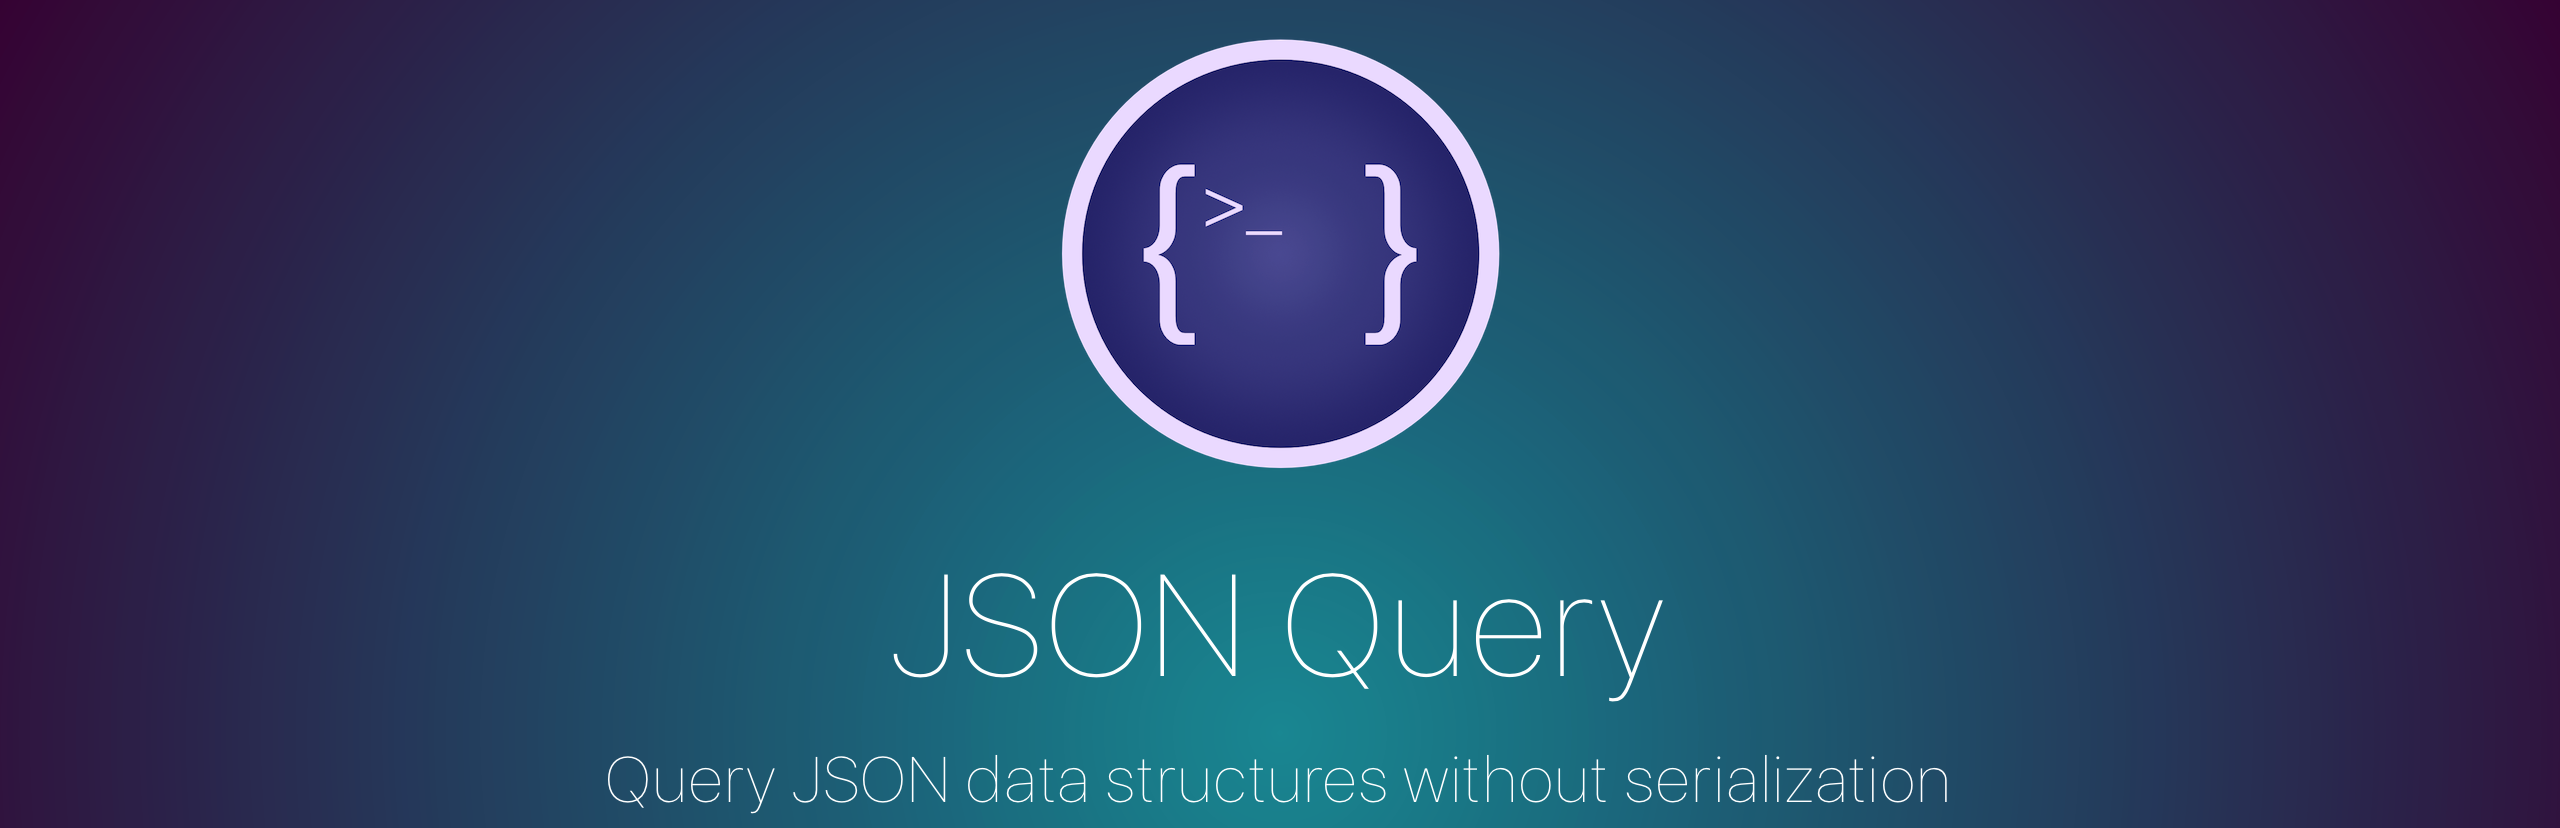 JSON Query: Query JSON data structures without serialization